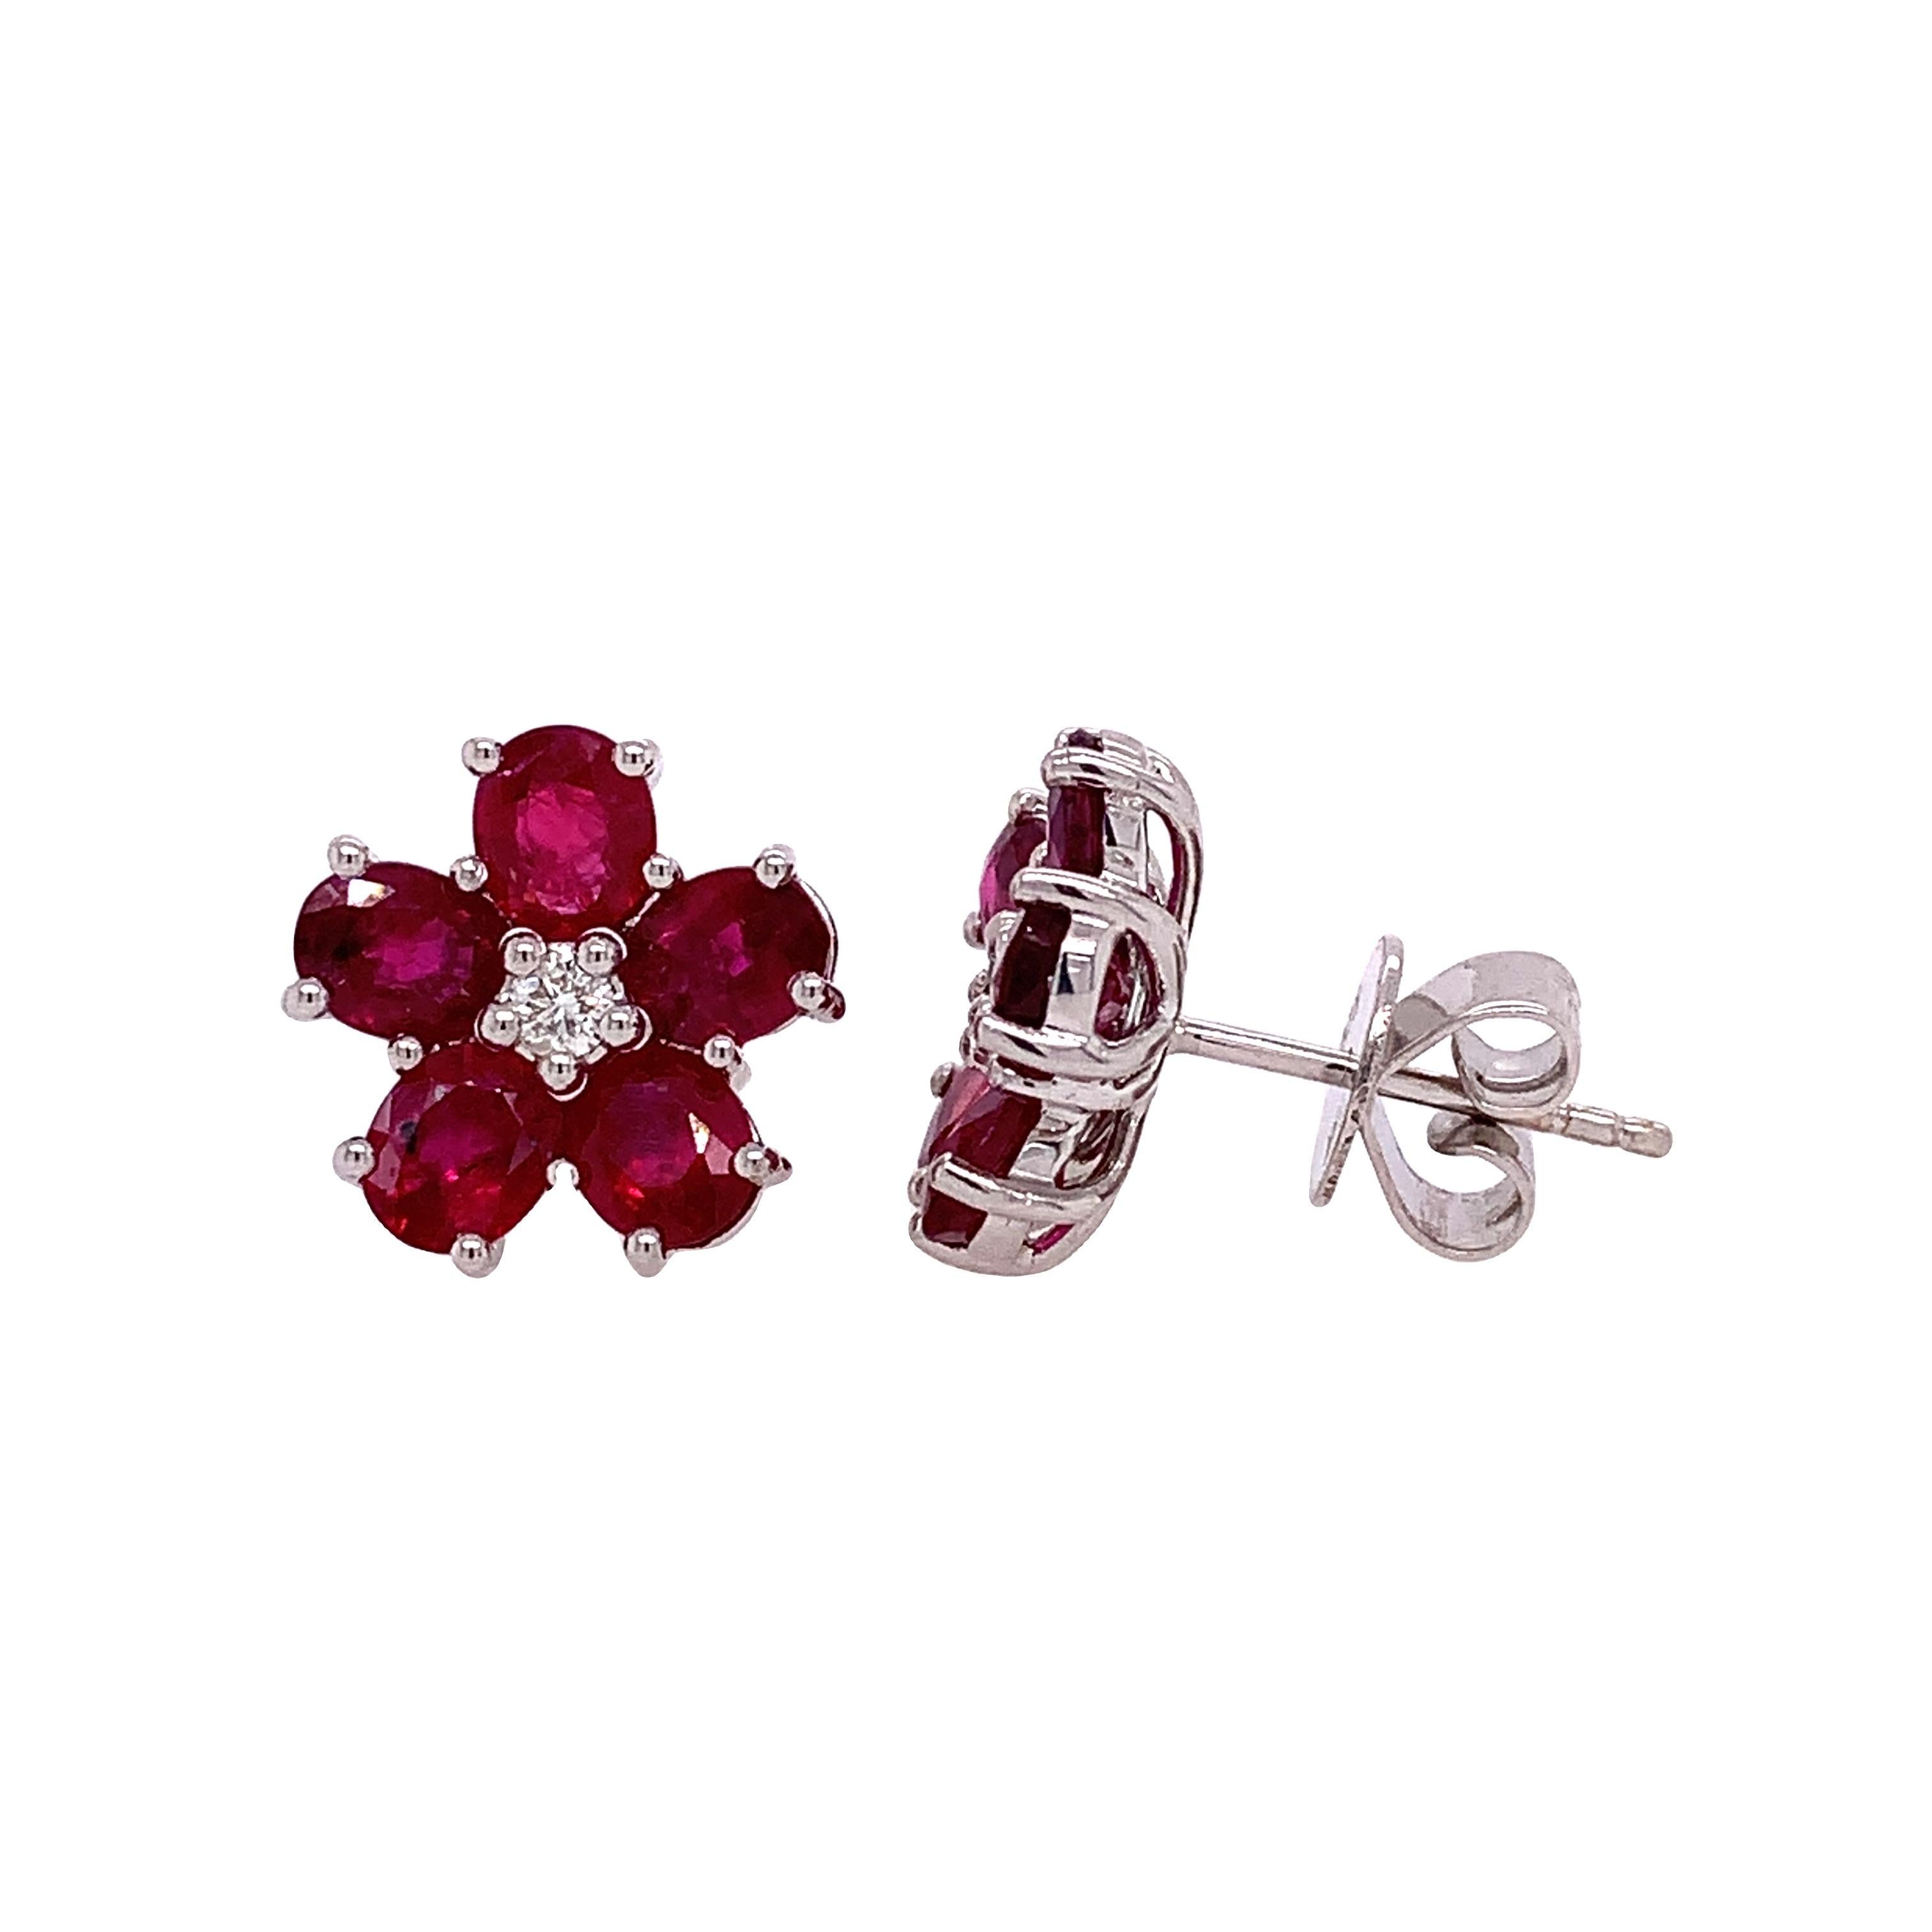 18K White Gold
Ruby: 4.74ct total weight
Diamond: 0.11ct total weight
All diamonds are G-H/SI stones.